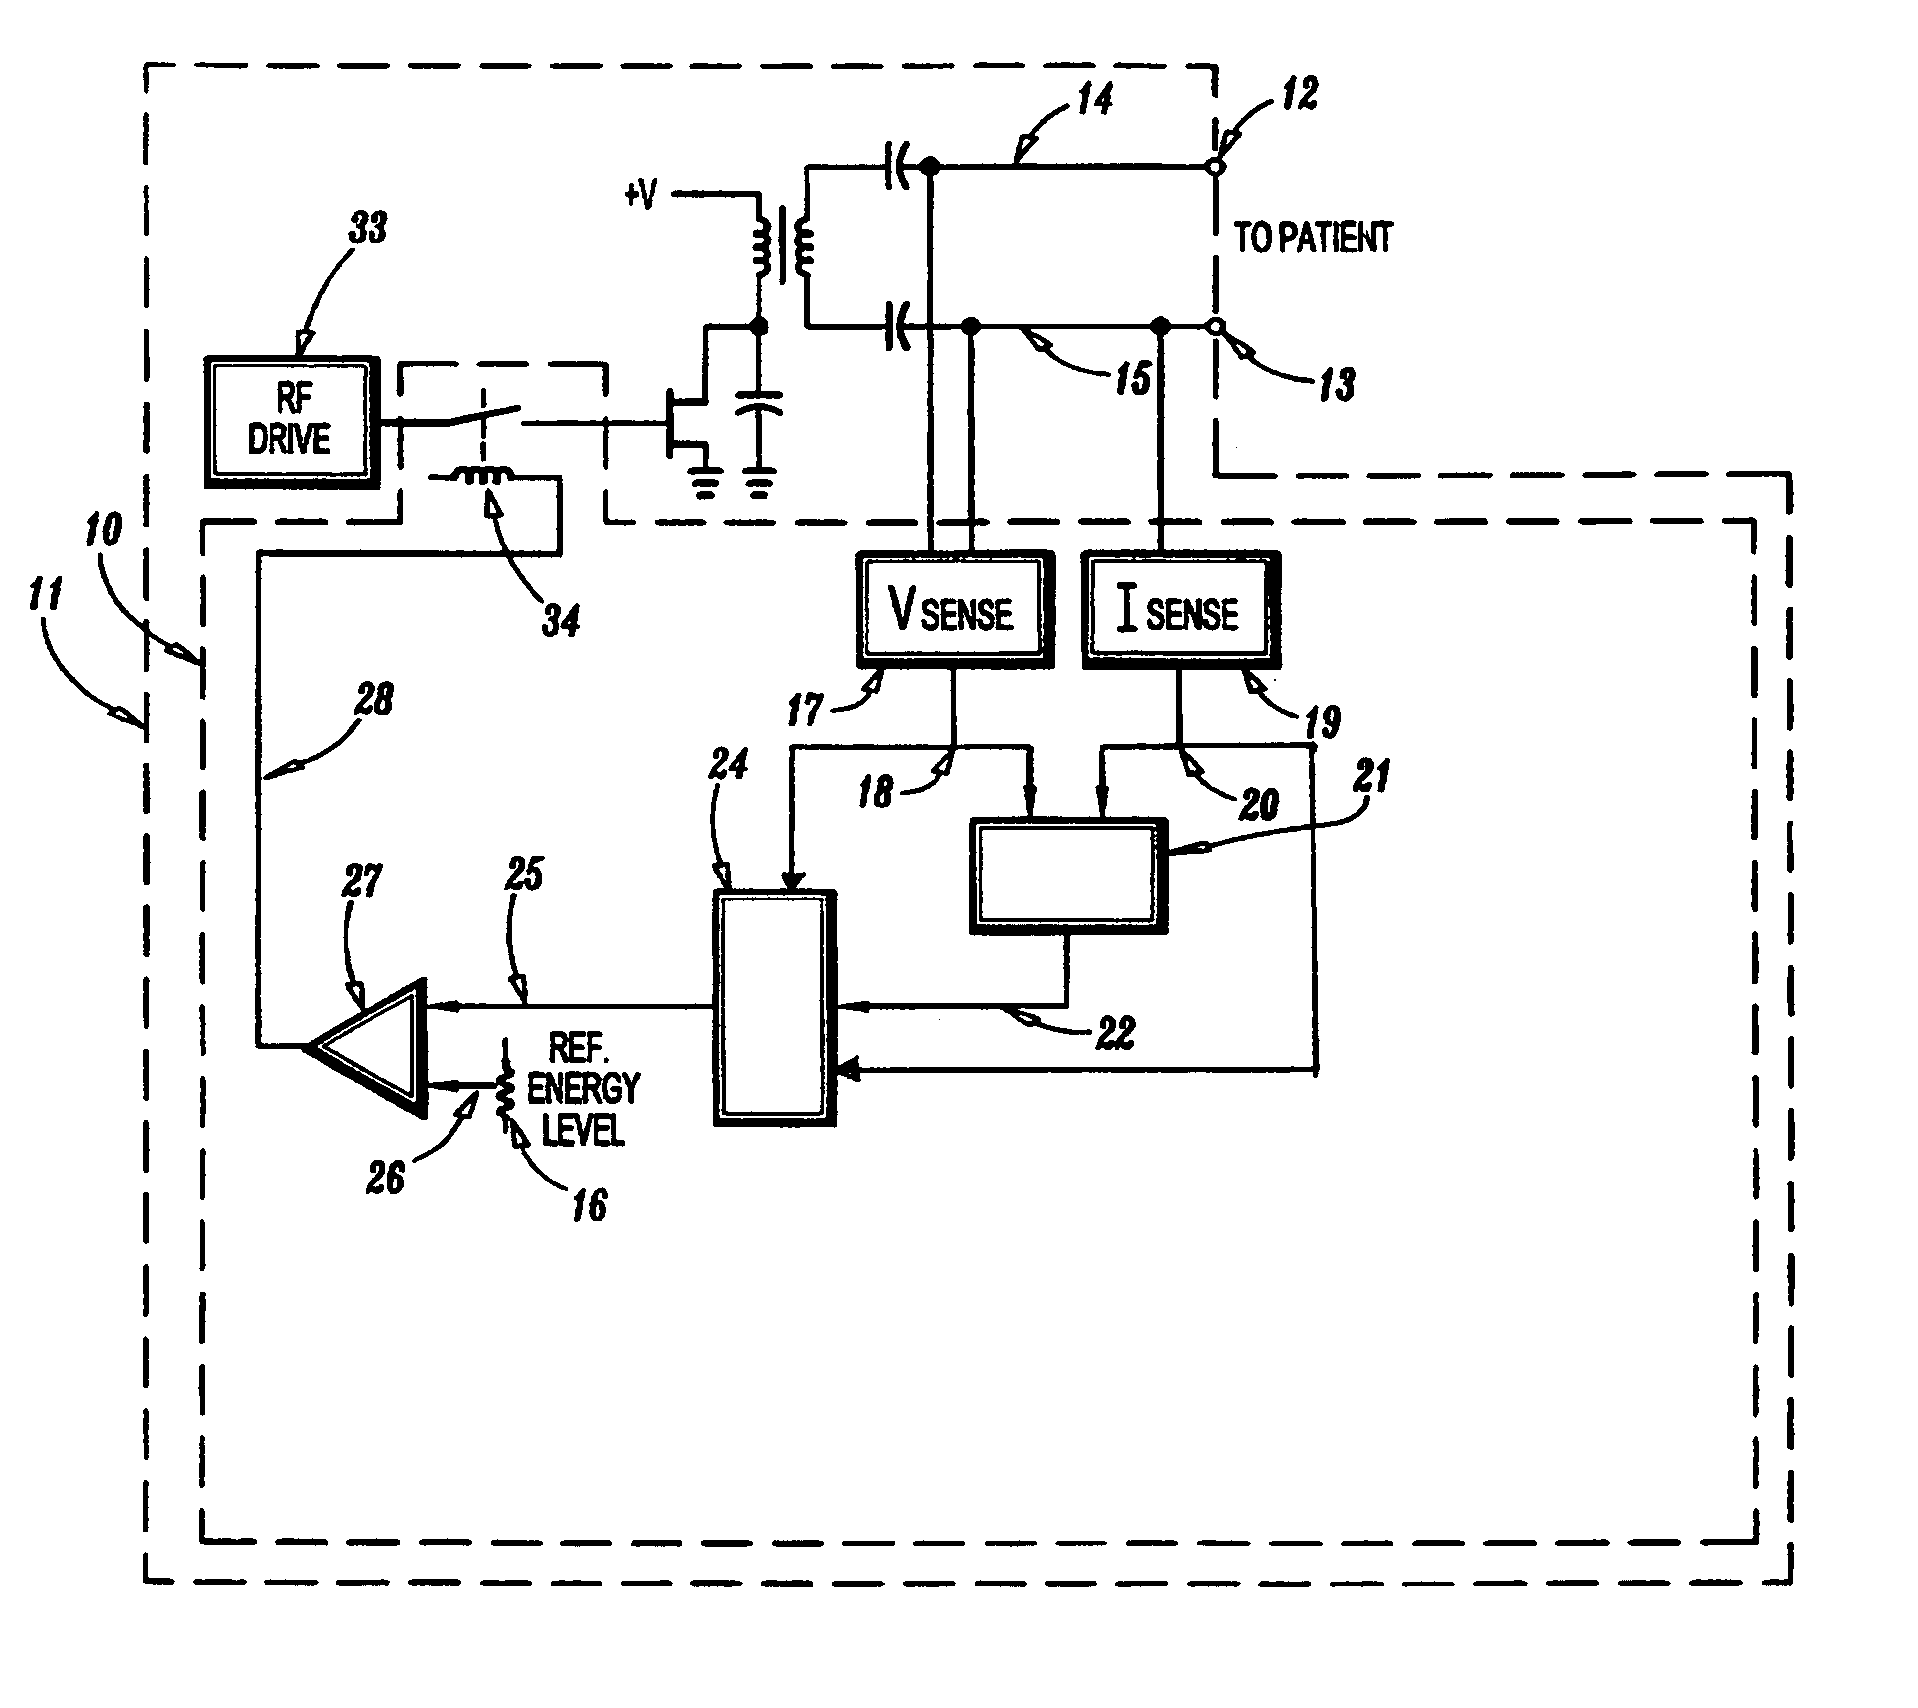 Automatic control system for an electrosurgical generator